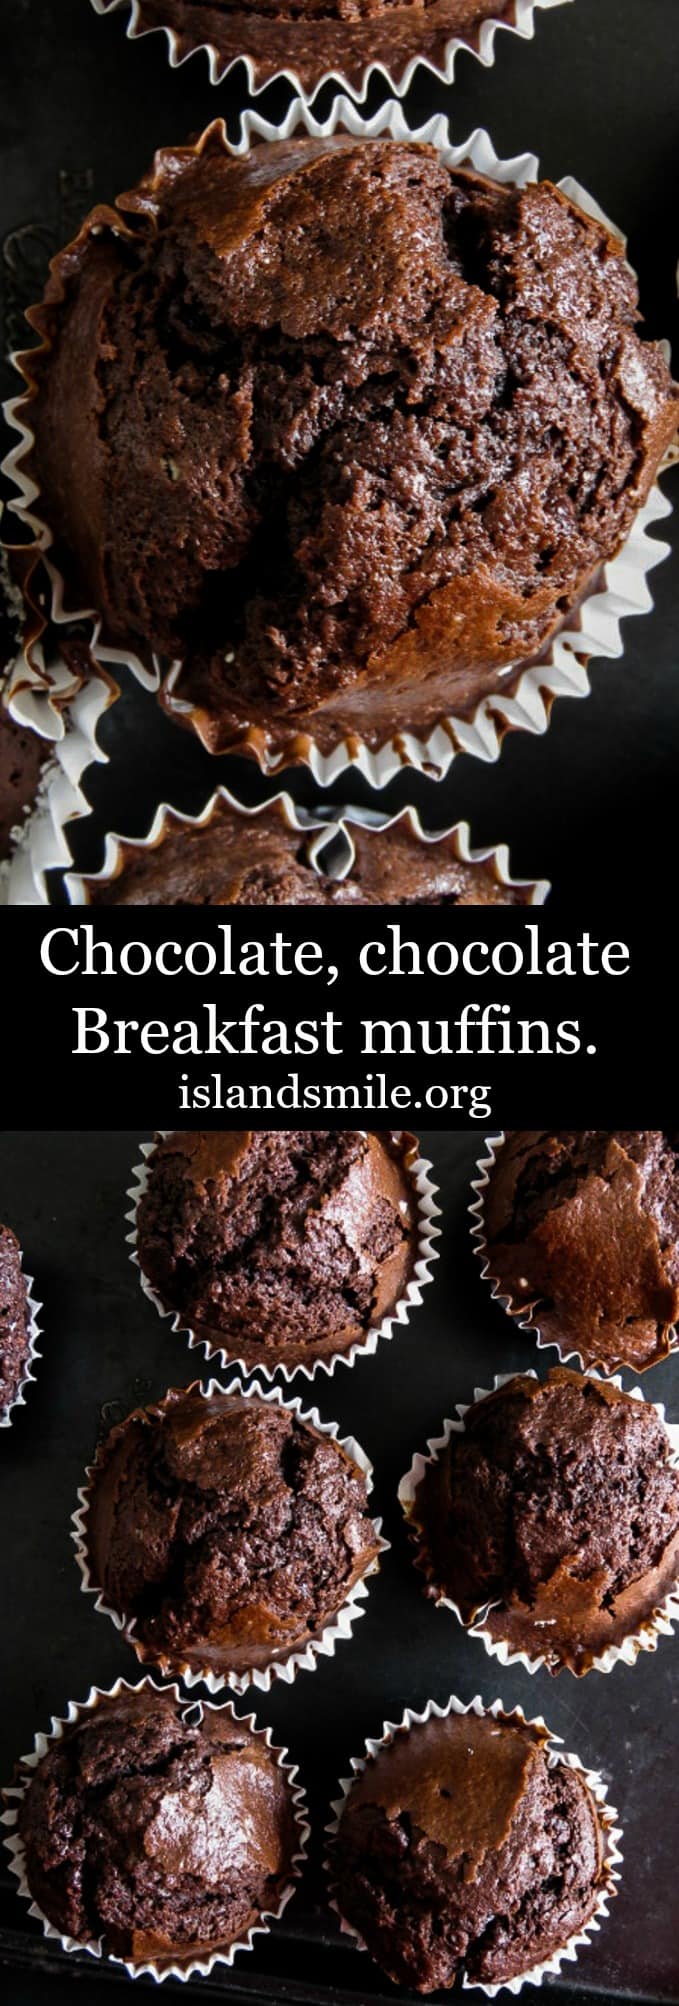 Chocolate,chocolate Breakfast muffins are airy and a chocolate lover's dream of what Breakfast should look like. Dark, moist and oozing with their favorite ingredient.